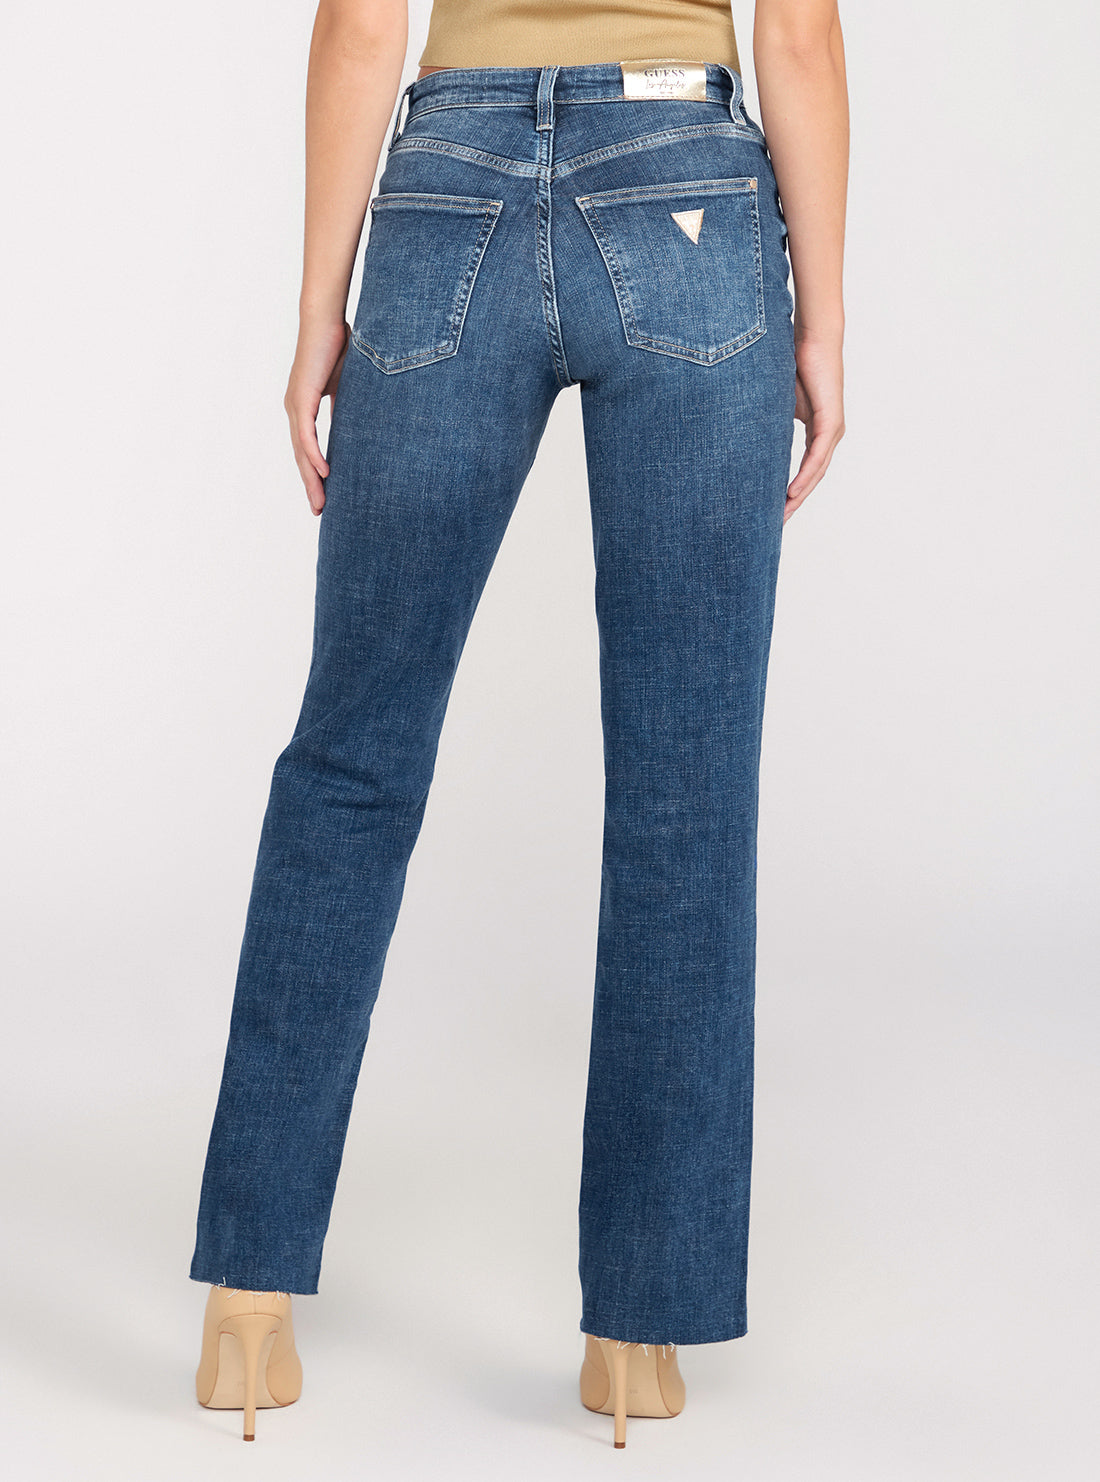 GUESS Mid-Rise Straight Leg 80s Denim Jeans back view